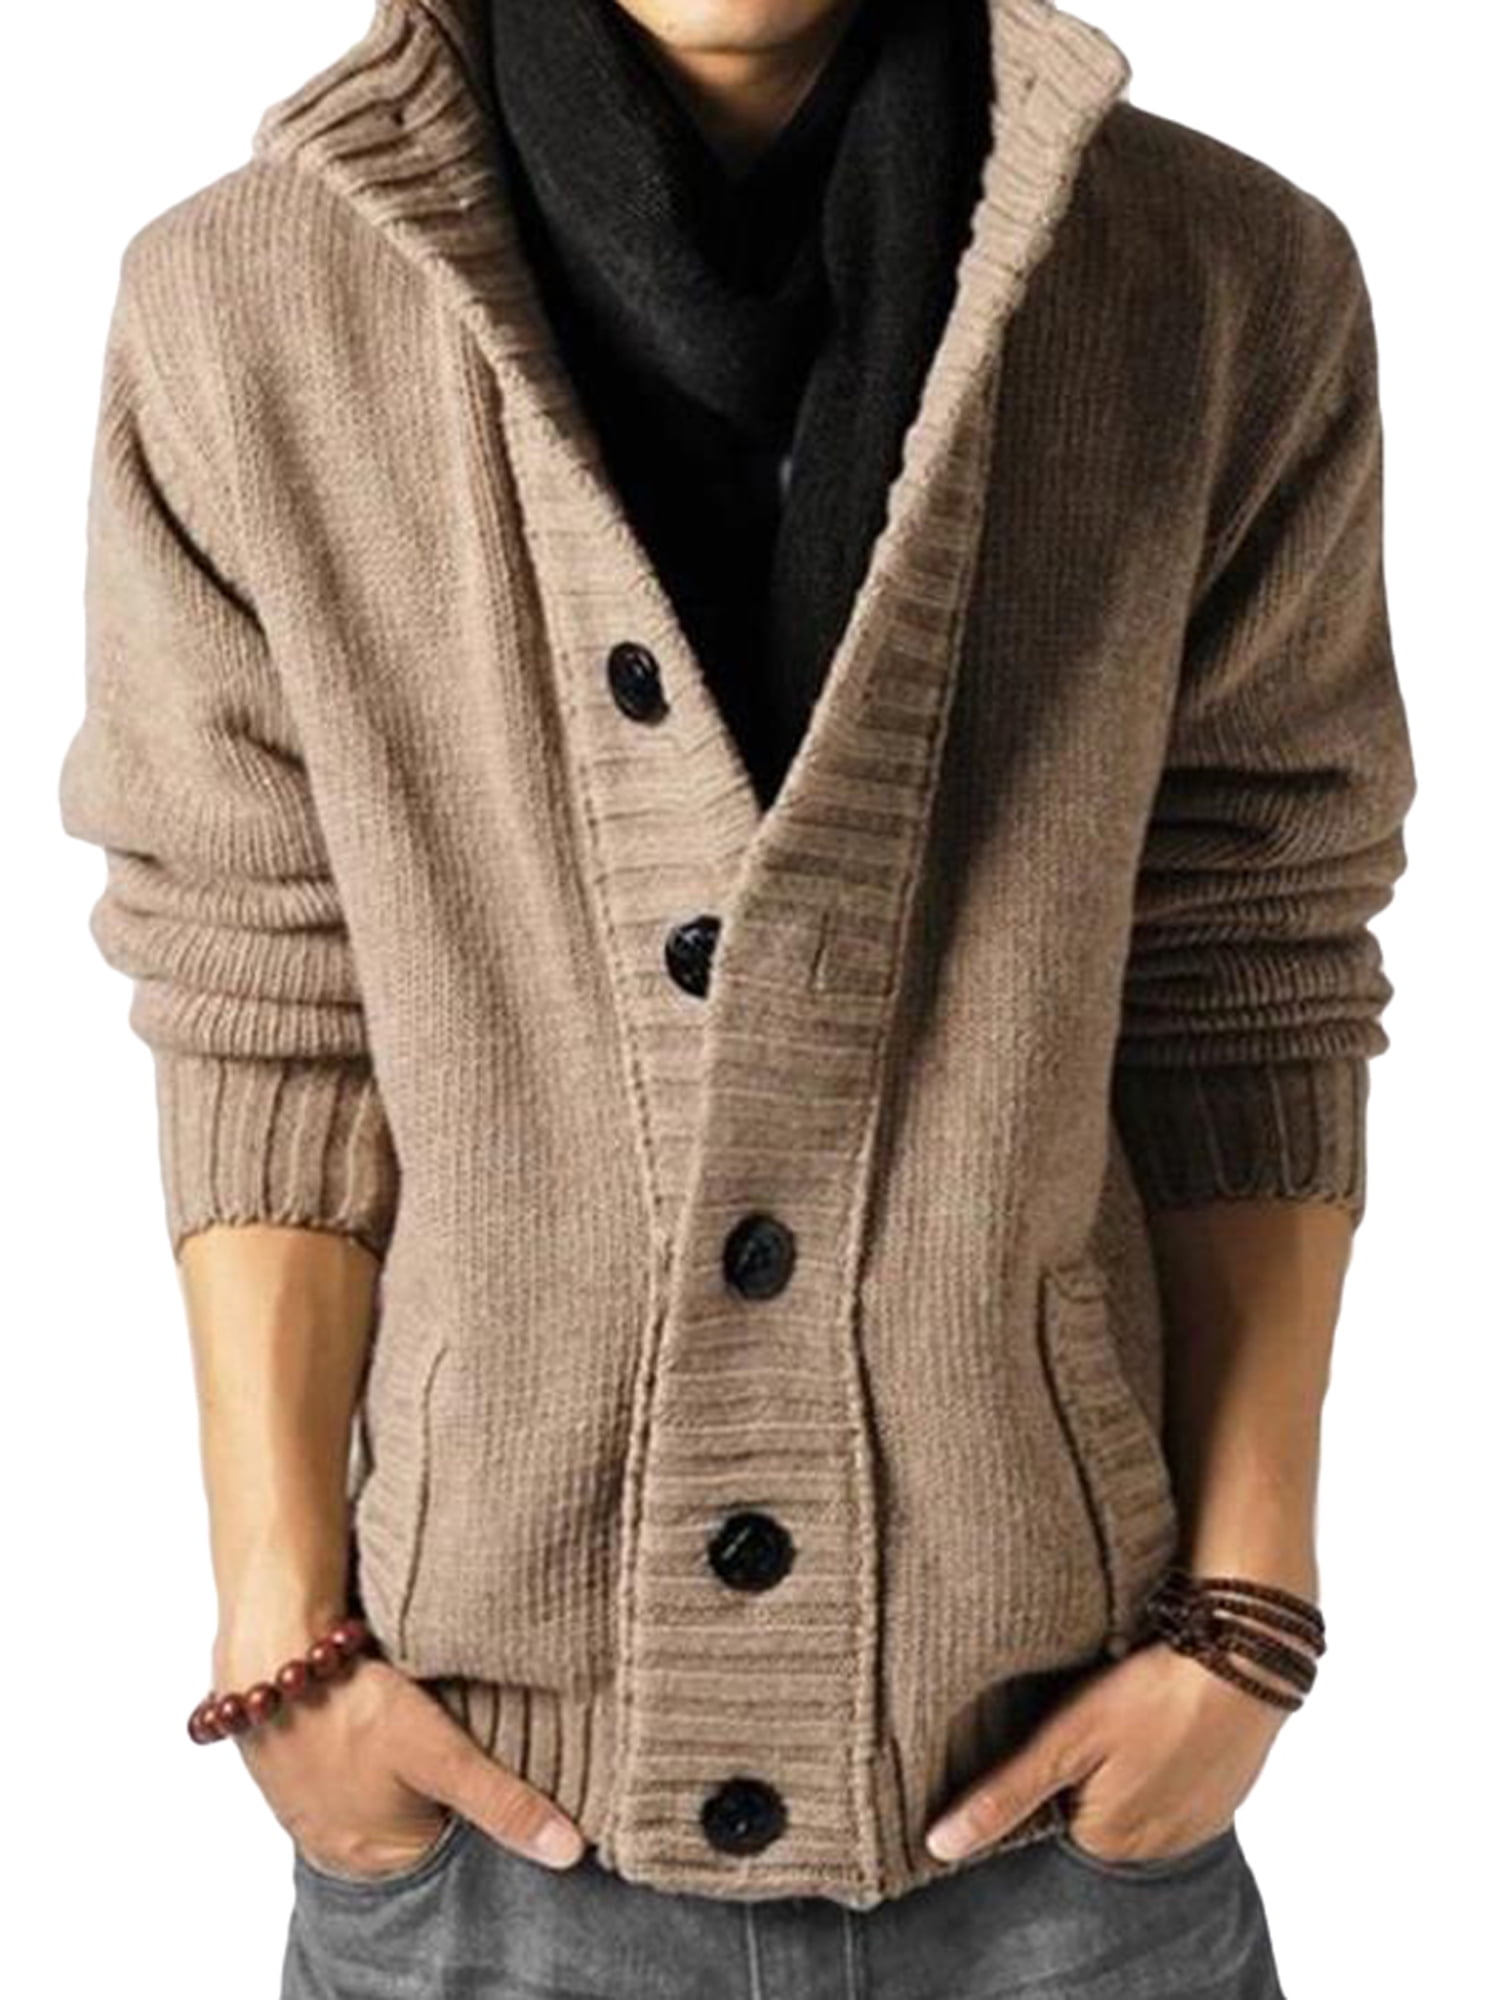 Mens Button Closure Hooded Sweatershirt Contrast Color Slim Fit Cardigan 